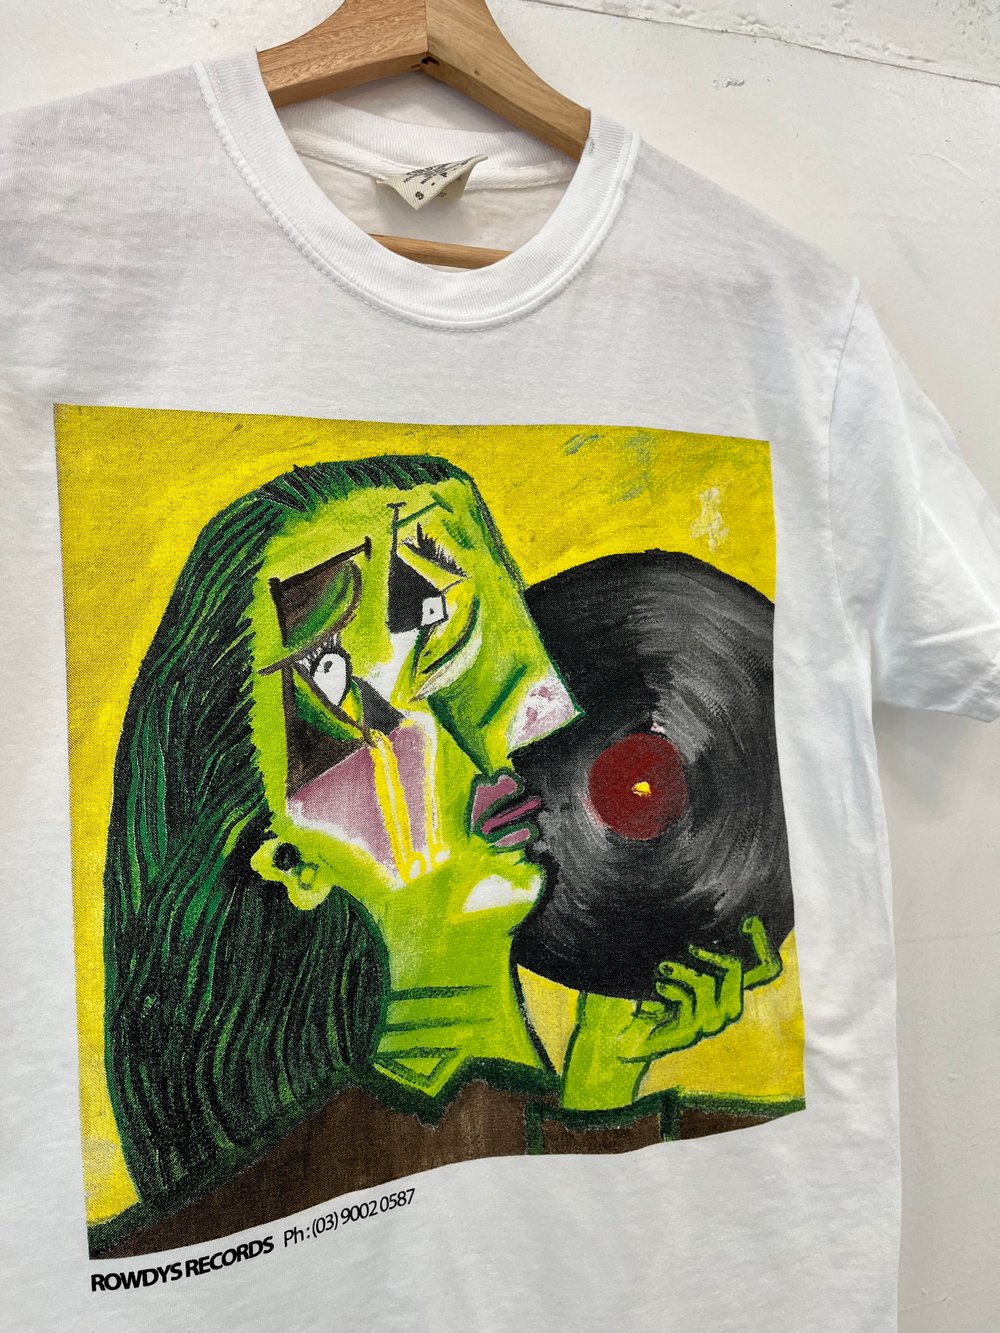 Ellen Sayers 'The Weeping Record' Shirt